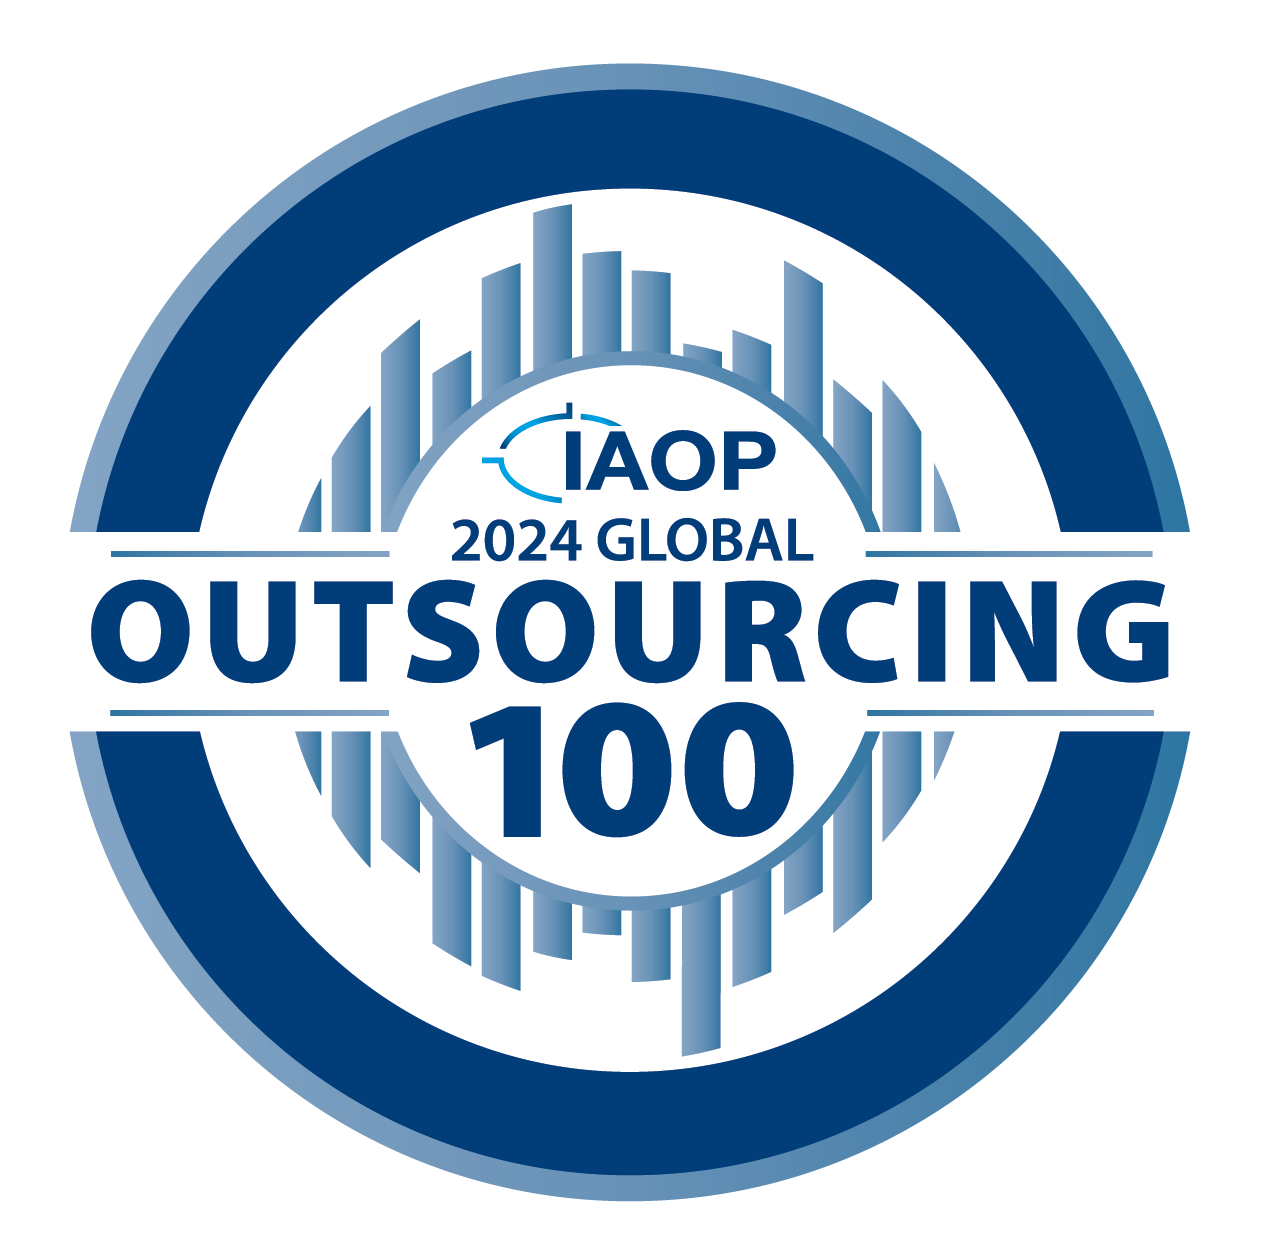 Canon Business Process Services (Canon) was recently named to the IAOP® 2024 Global 100® Outsourcing list.